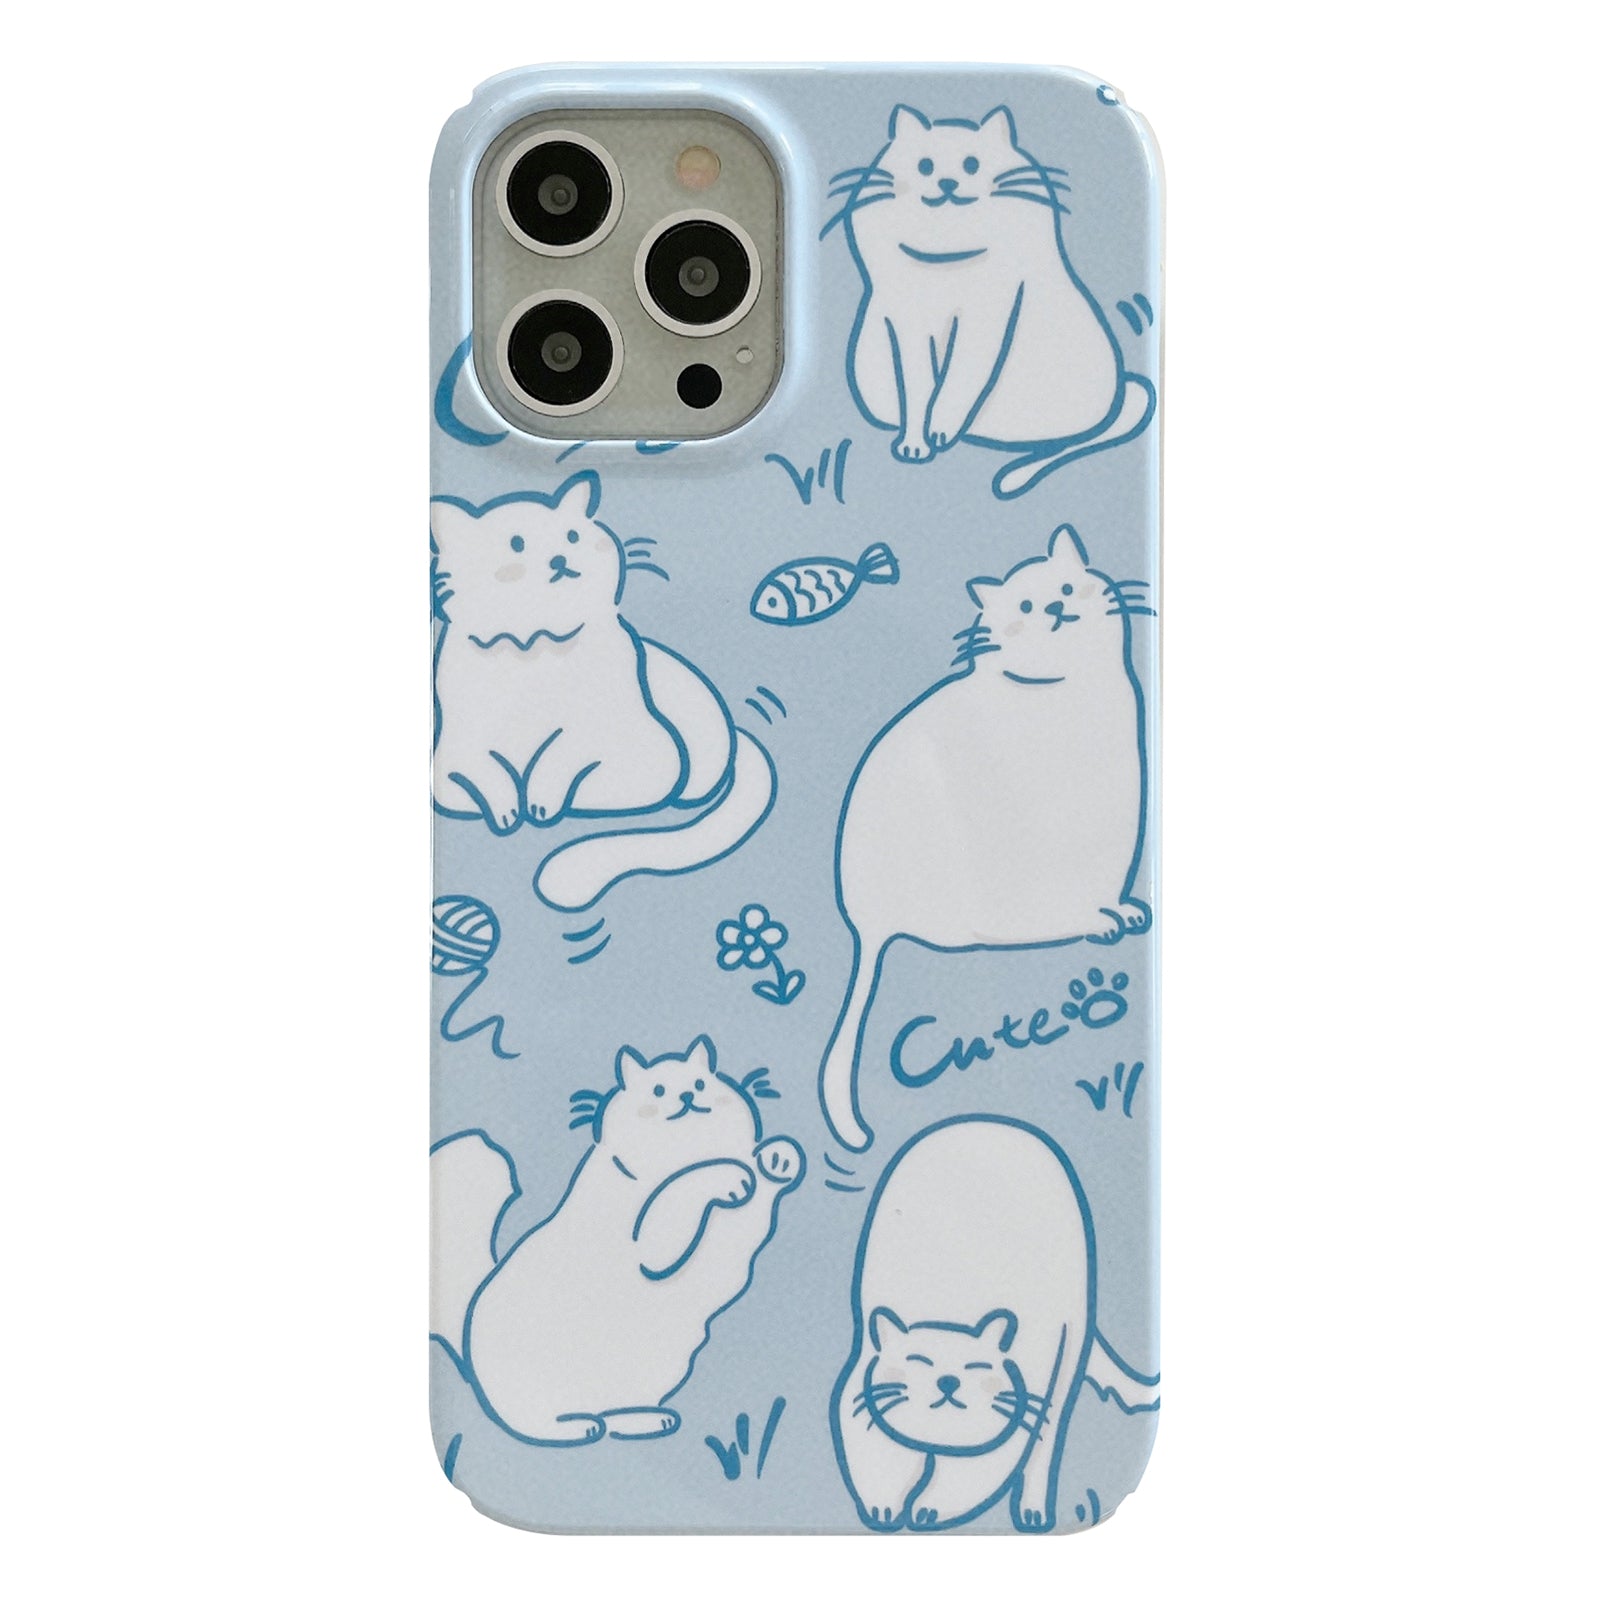 Hard PC Phone Cover for iPhone 12 Pro 6.1 inch Pattern Printing Anti-Drop Glossy Phone Case - Cute Cats